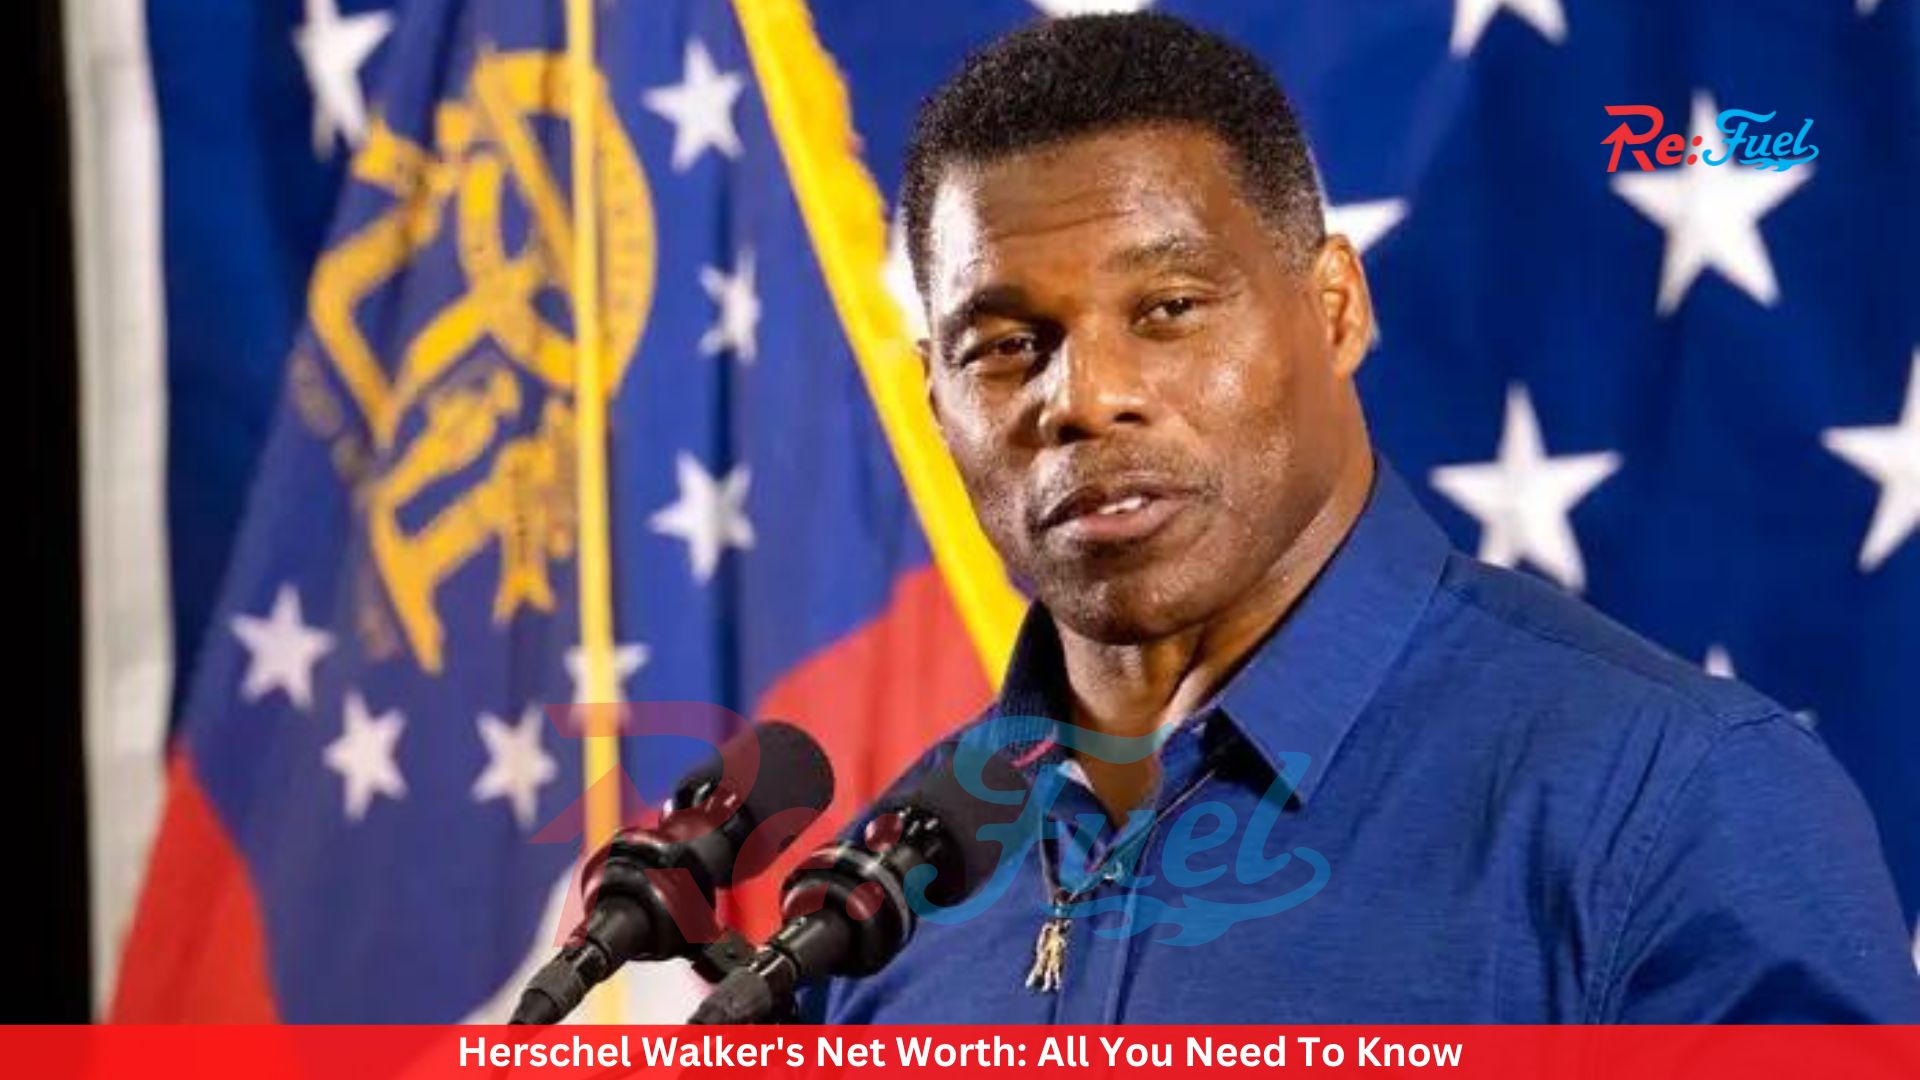 Herschel Walker's Net Worth: All You Need To Know